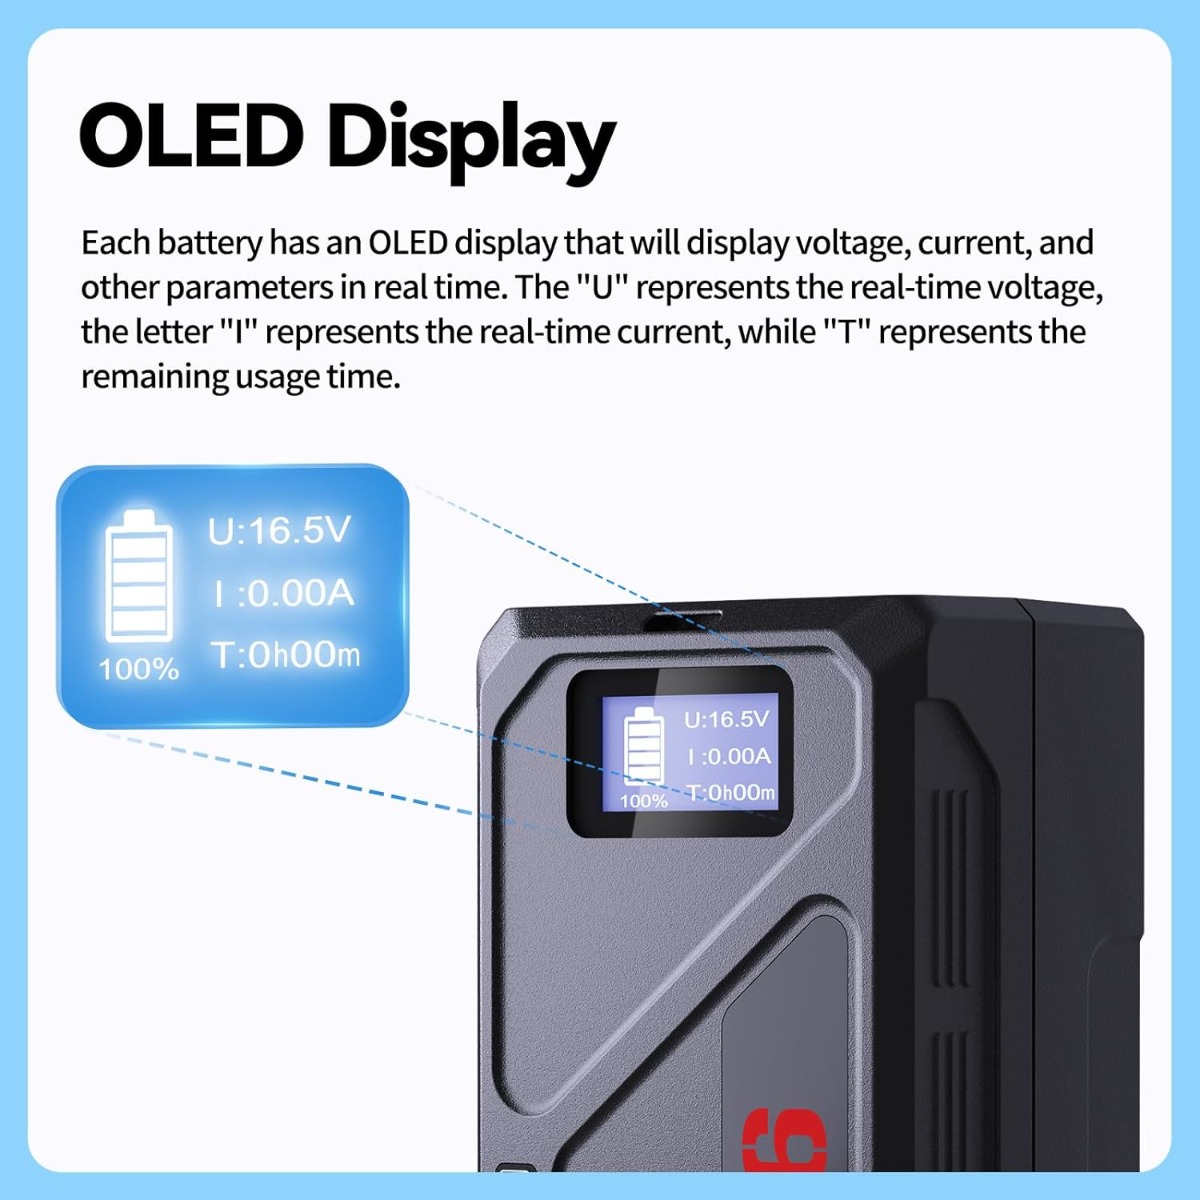 Came TV V Mount Battery, Mini 99C 99Wh V Lock Battery Support 65W PD USB-C Fast Charging 1.5 Hours, with D-Tap 14.4V / USB-A Port/BP/8.4V DC//OLED Display, 6900mAh Mount Battery for Camera